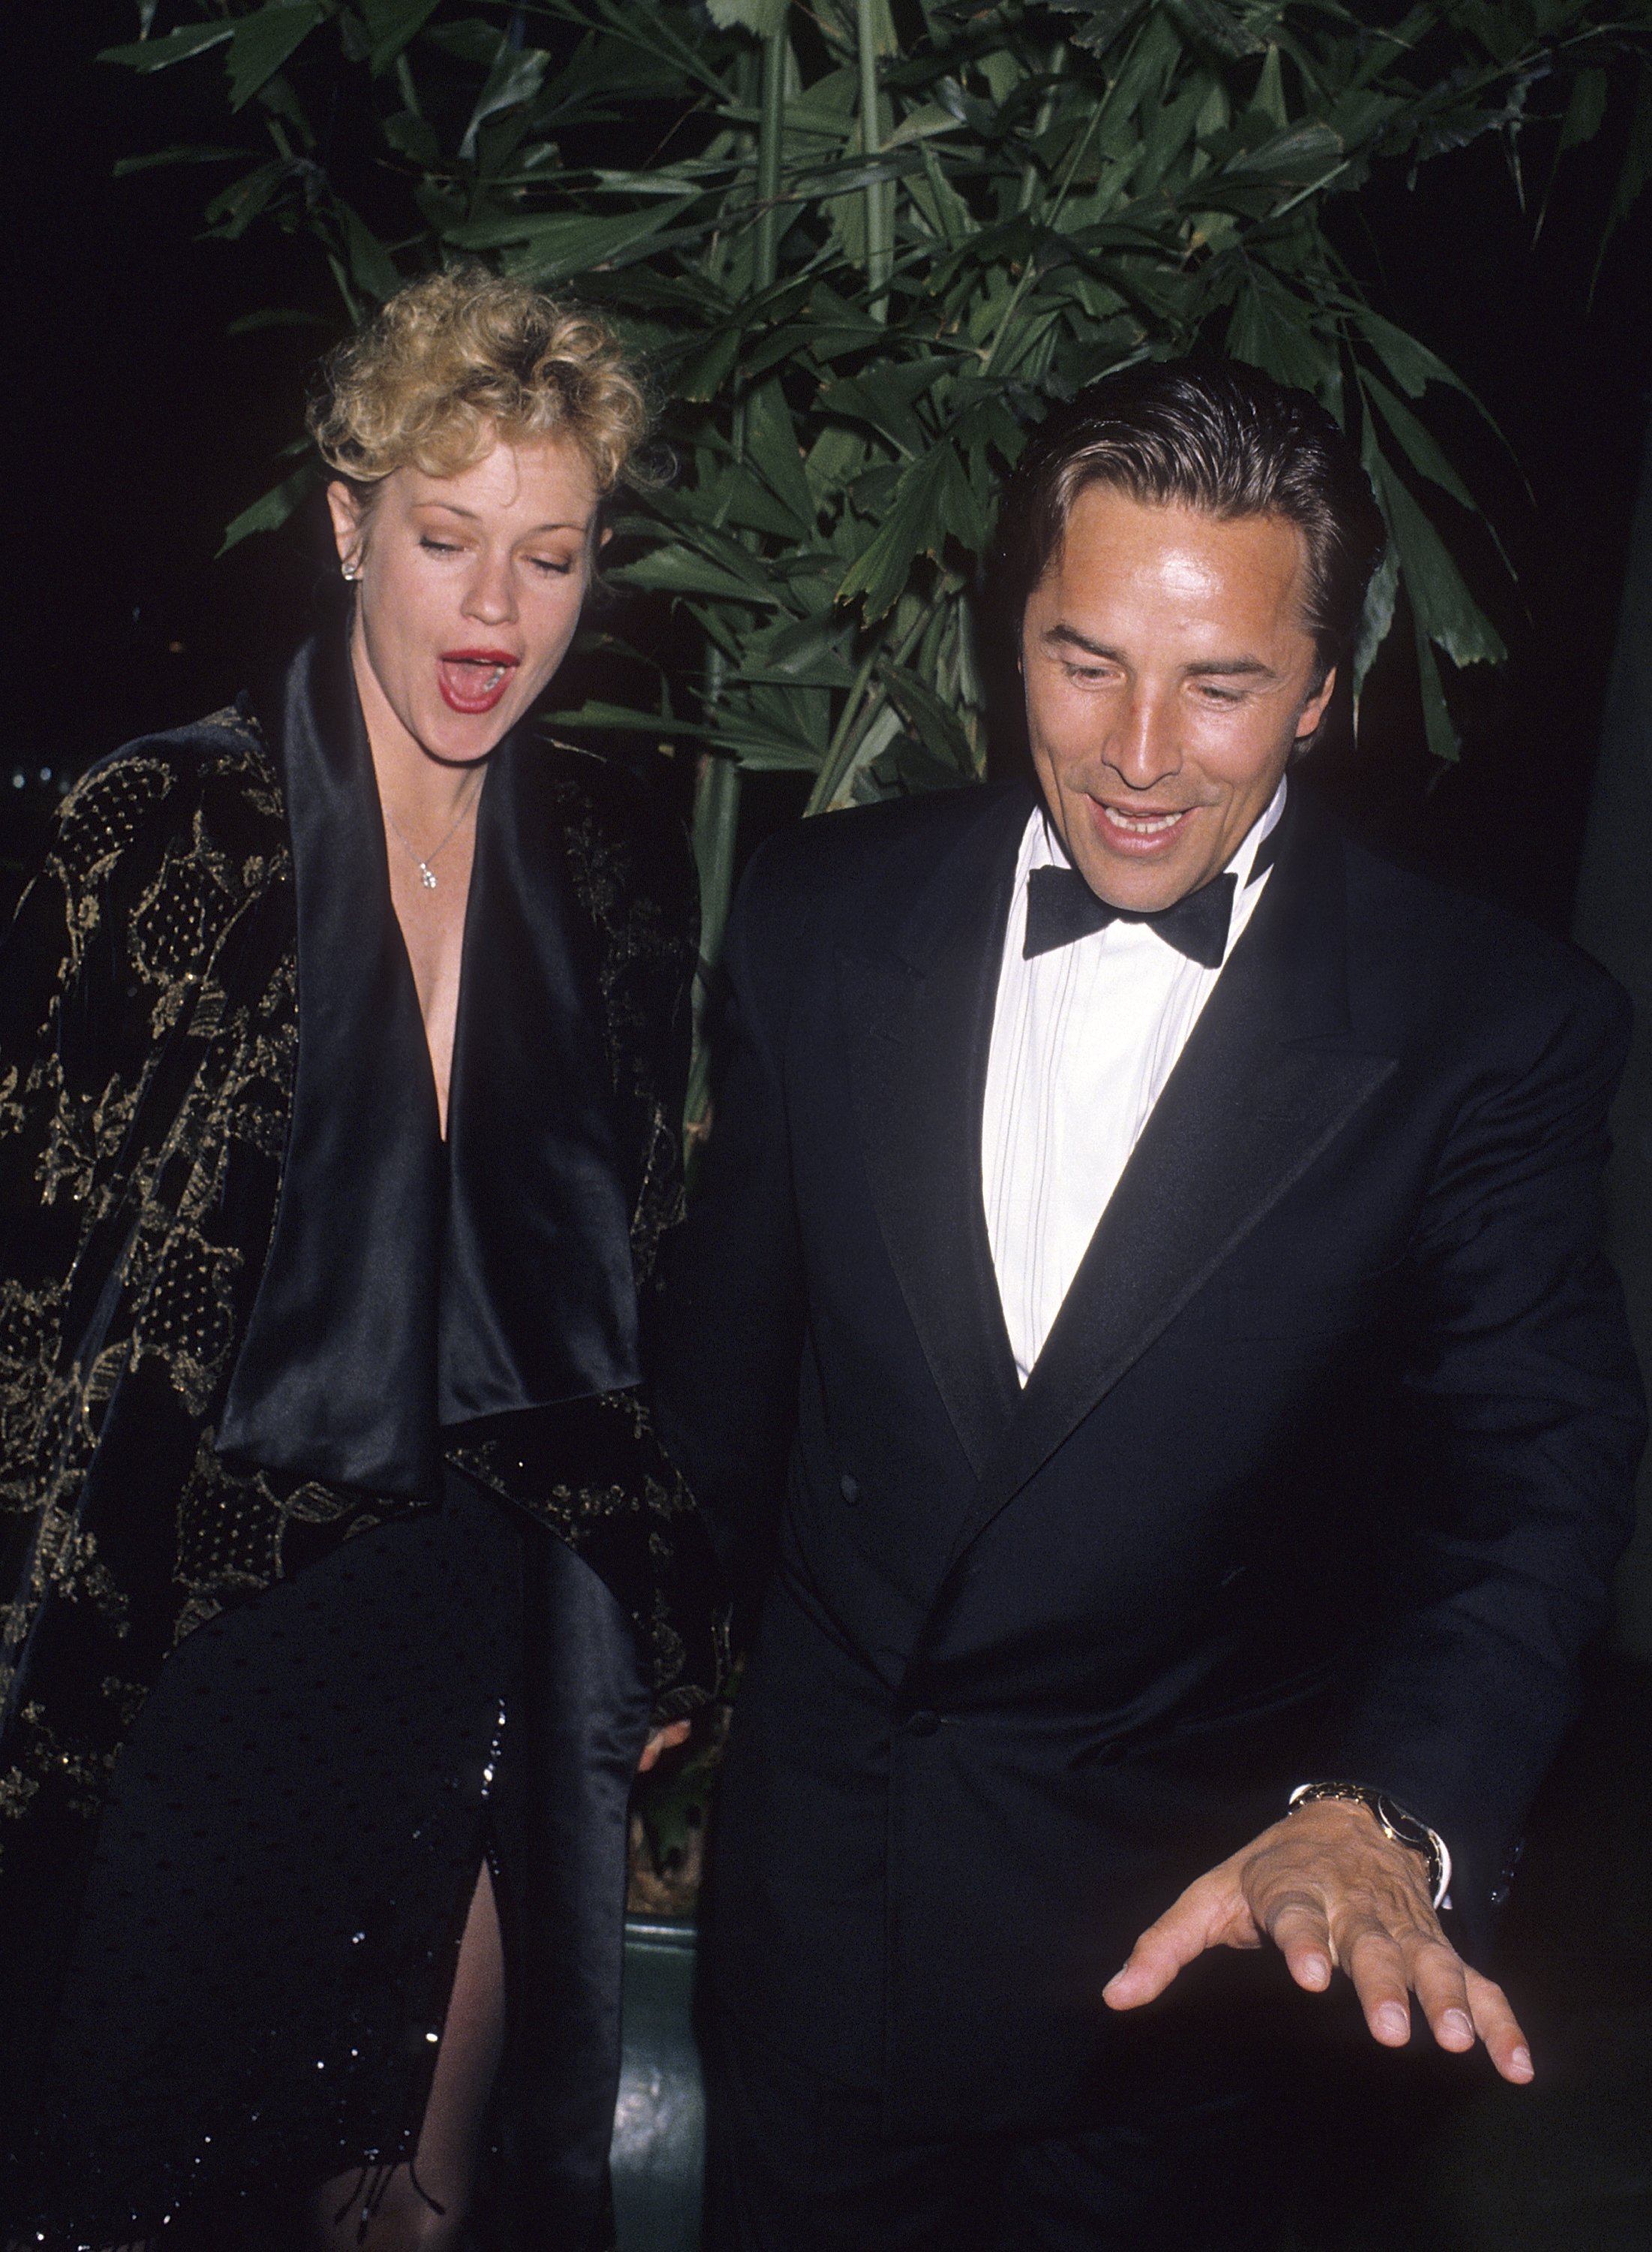 Melanie Griffith and Don Johnson pictured the First Annual Fire & Ice Ball to Benefit Revlon/UCLA Women's Cancer Research Program in 1990. | Source: Getty Images